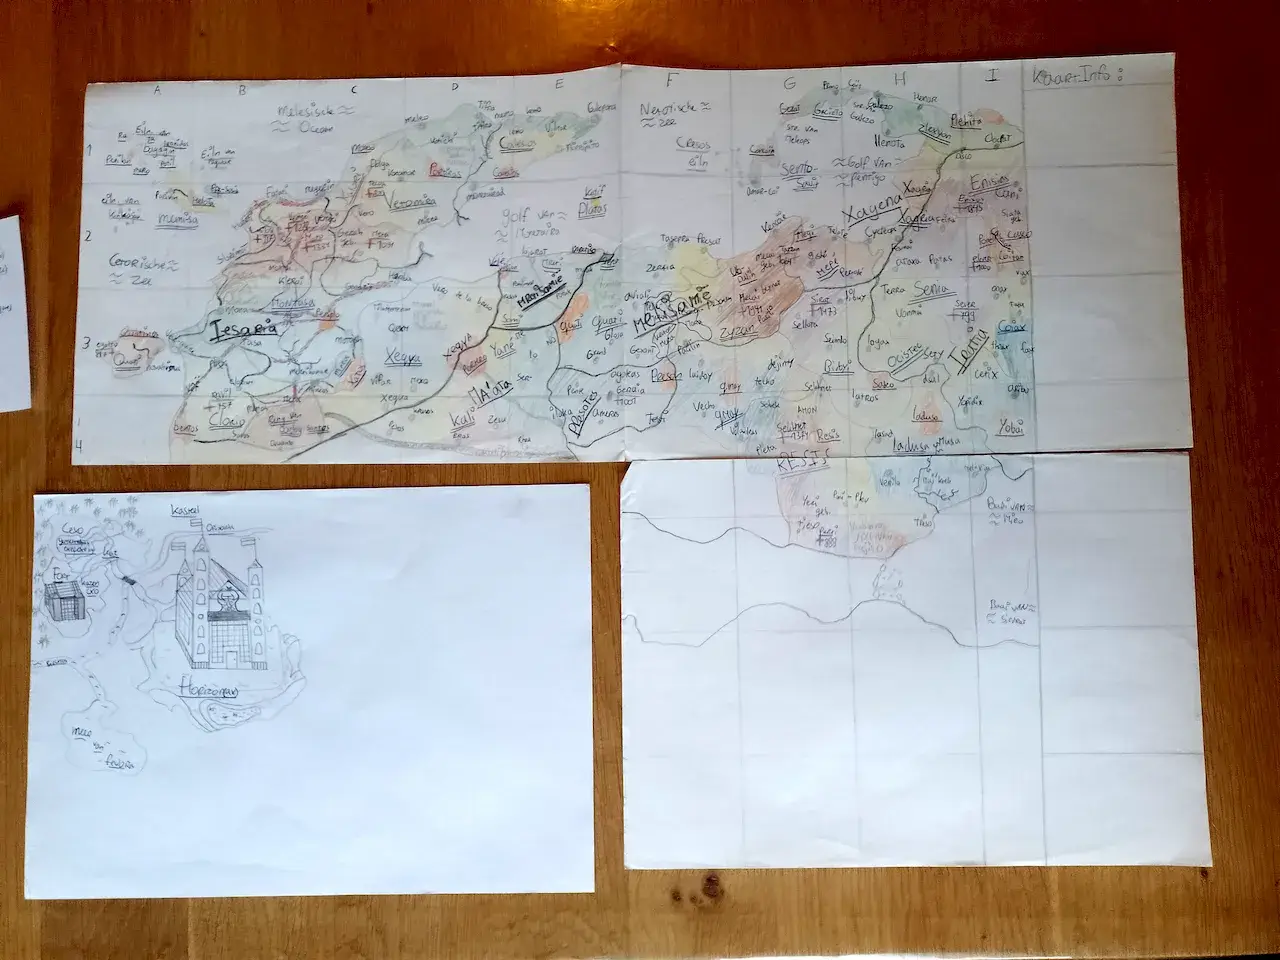 These are just two parts of fantasy maps I could find. I don’t think you were supposed to play a game with these.